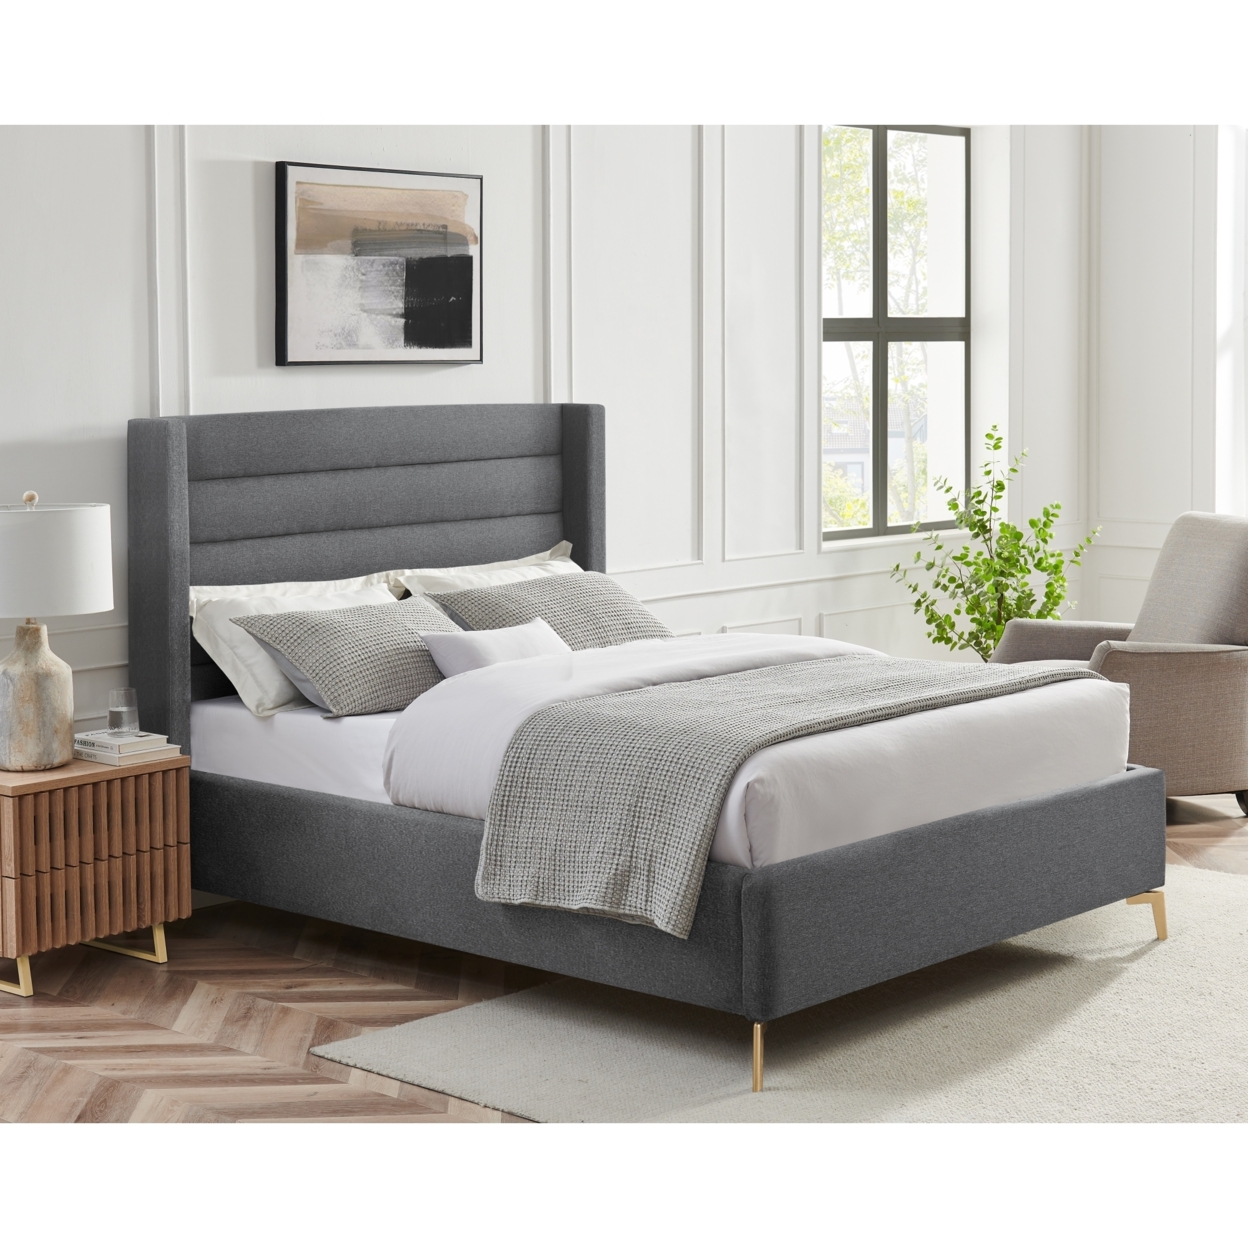 Rayce Bed - Linen Upholstered, Wingback Channel Tufted Headboard, Oblique Legs, Slats Included - Grey, Queen